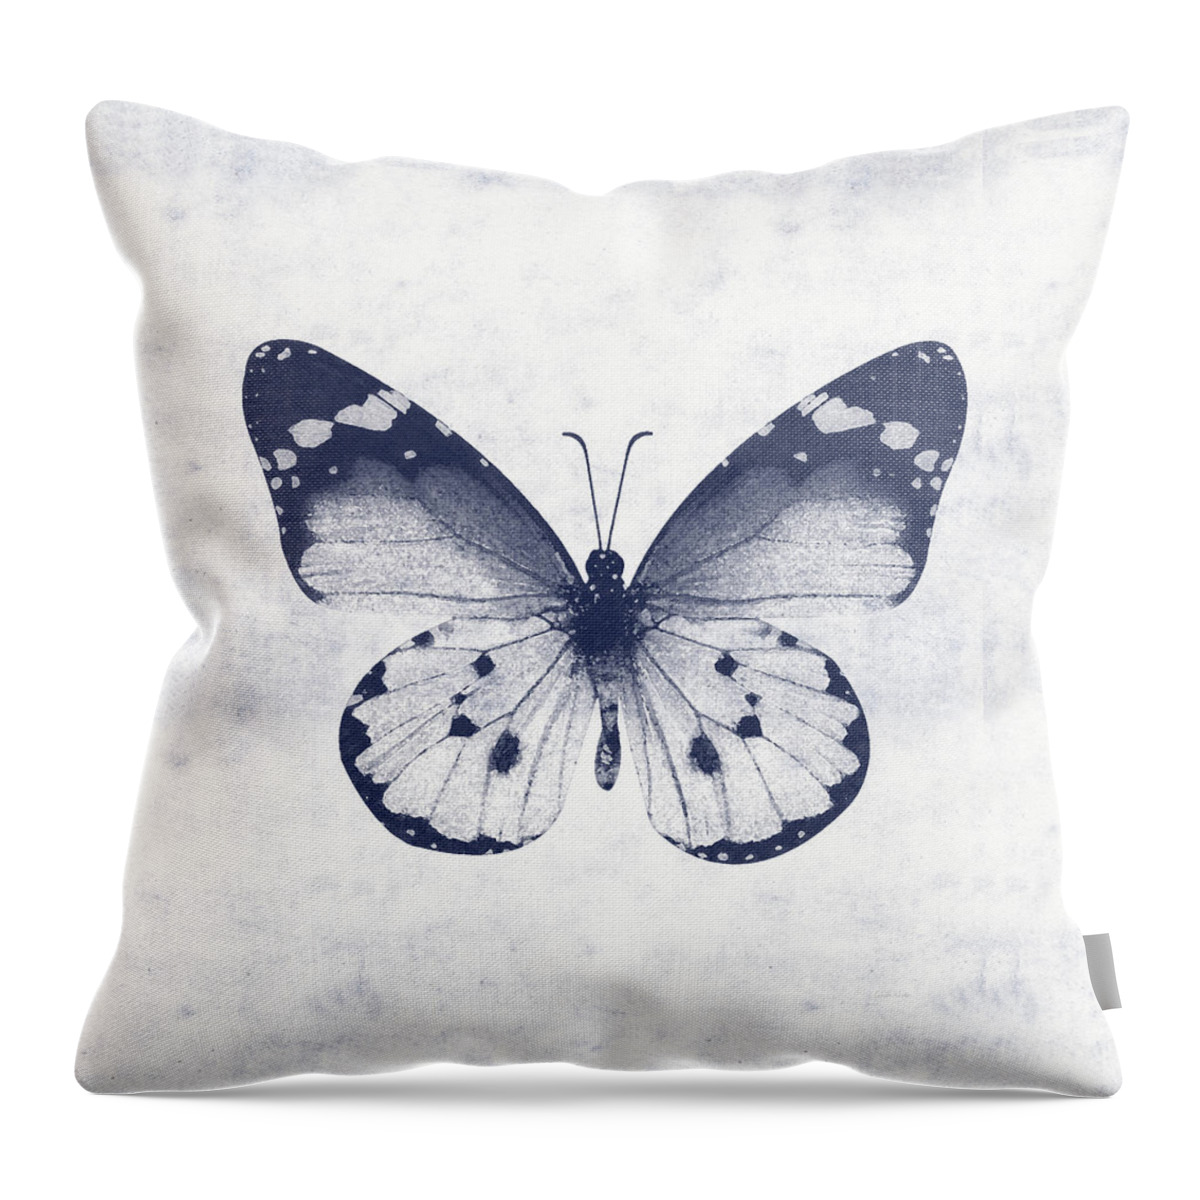 Butterfly Throw Pillow featuring the mixed media Indigo and White Butterfly 1- Art by Linda Woods by Linda Woods